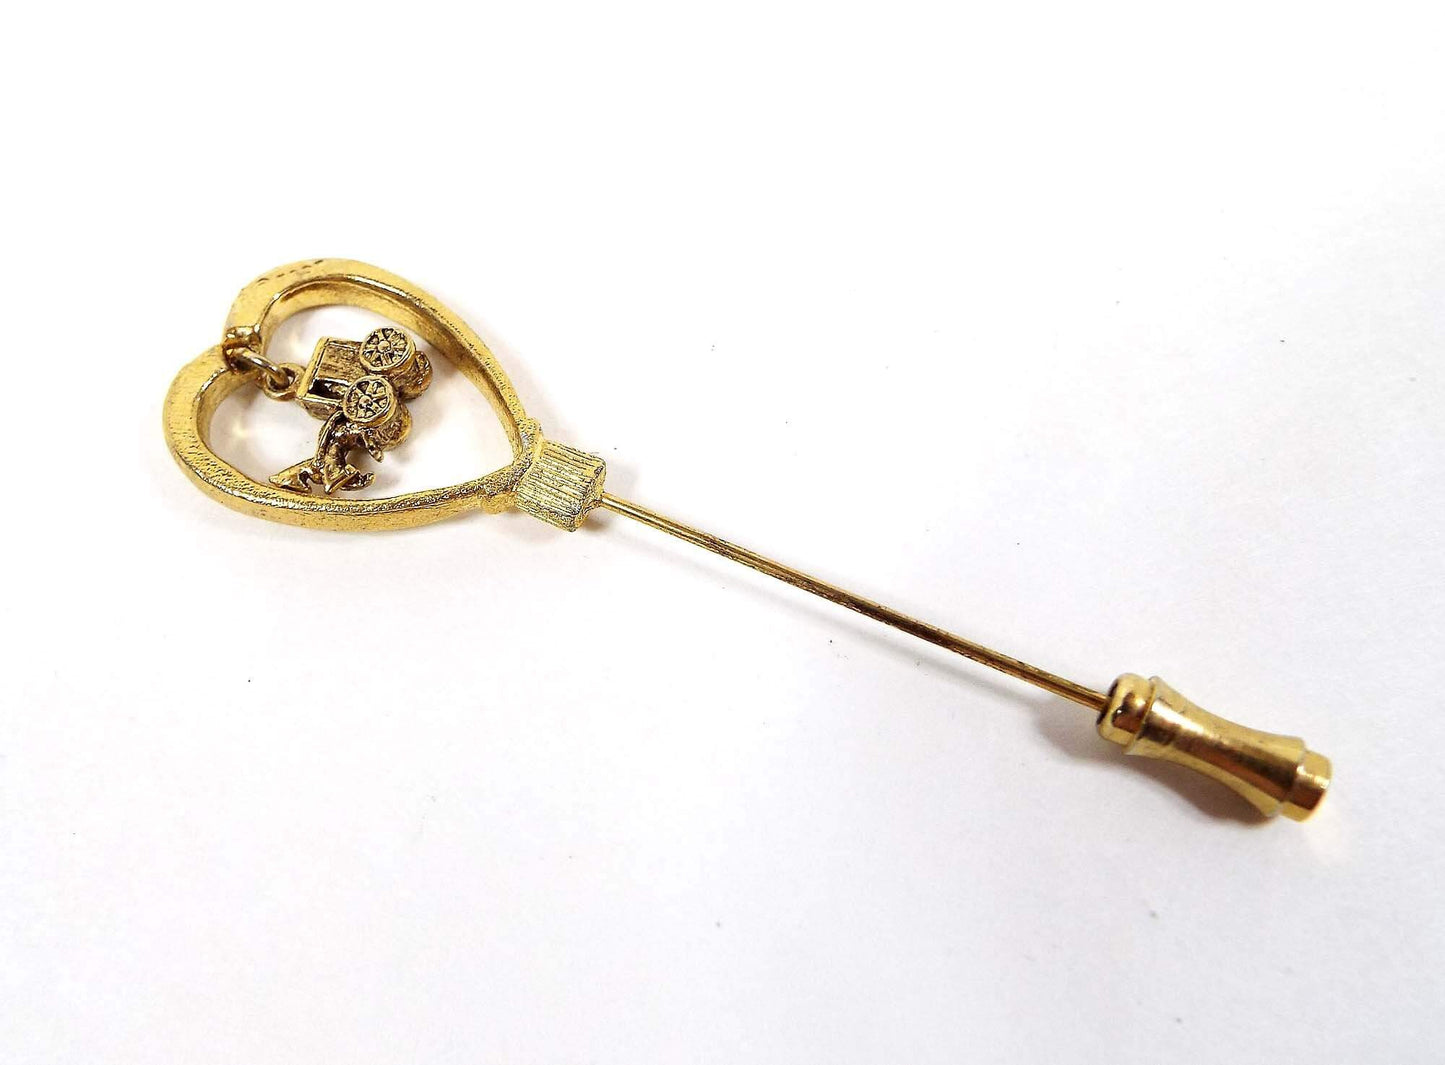 Fort Vintage Heart Stick Pin with Horse Carriage Charm